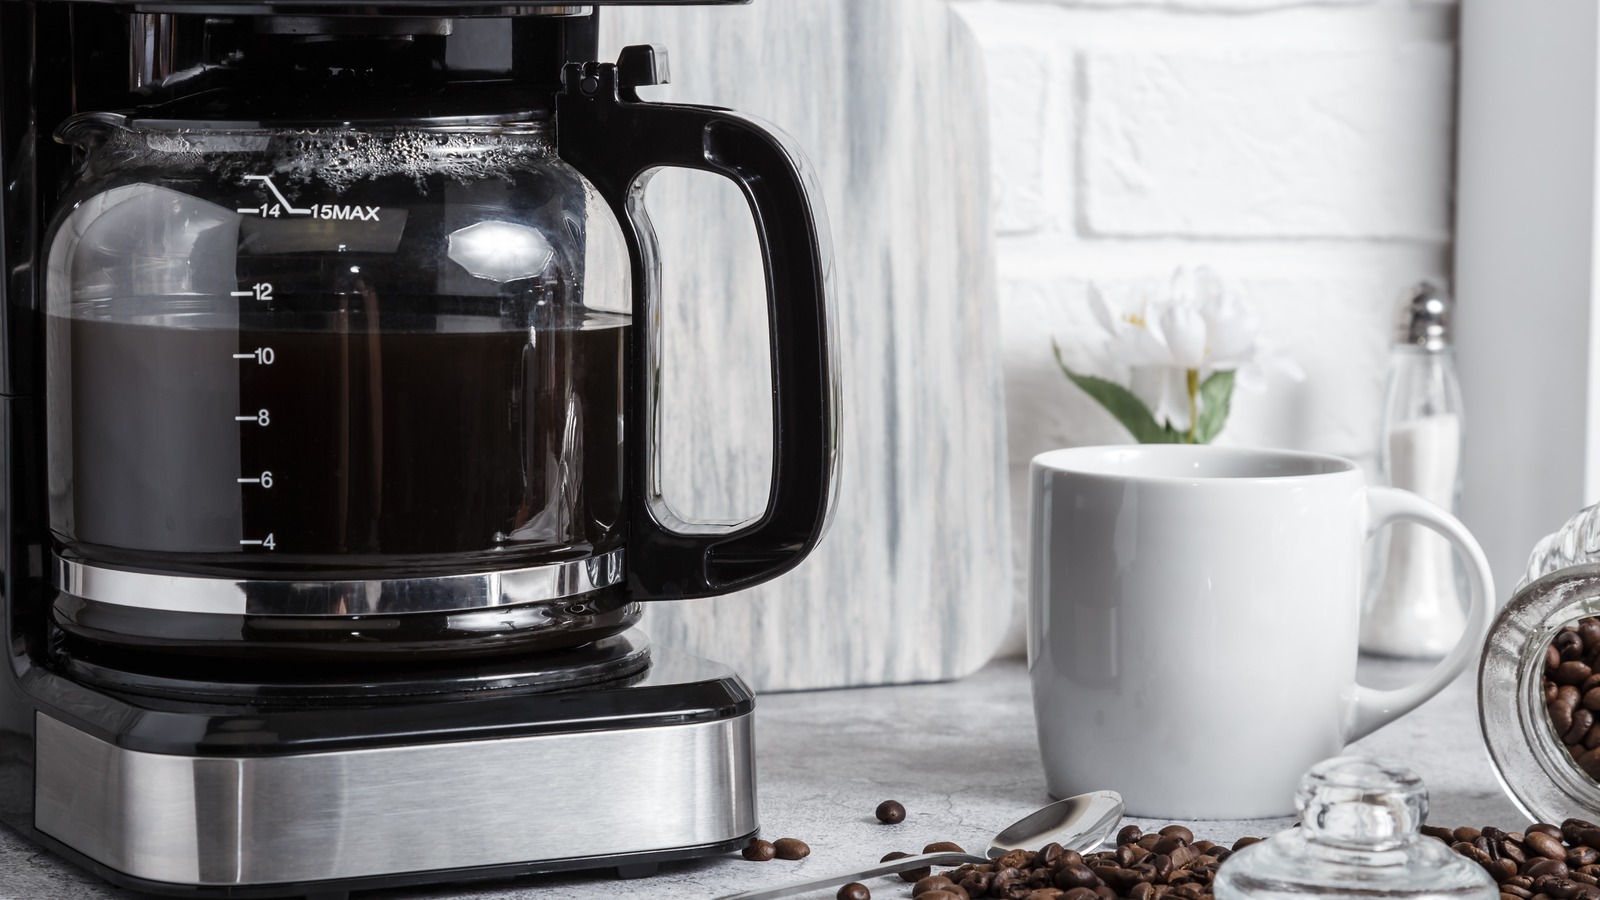 https://www.tastingtable.com/img/gallery/what-happens-if-you-brew-espresso-beans-in-a-drip-coffee-maker/l-intro-1680192804.jpg